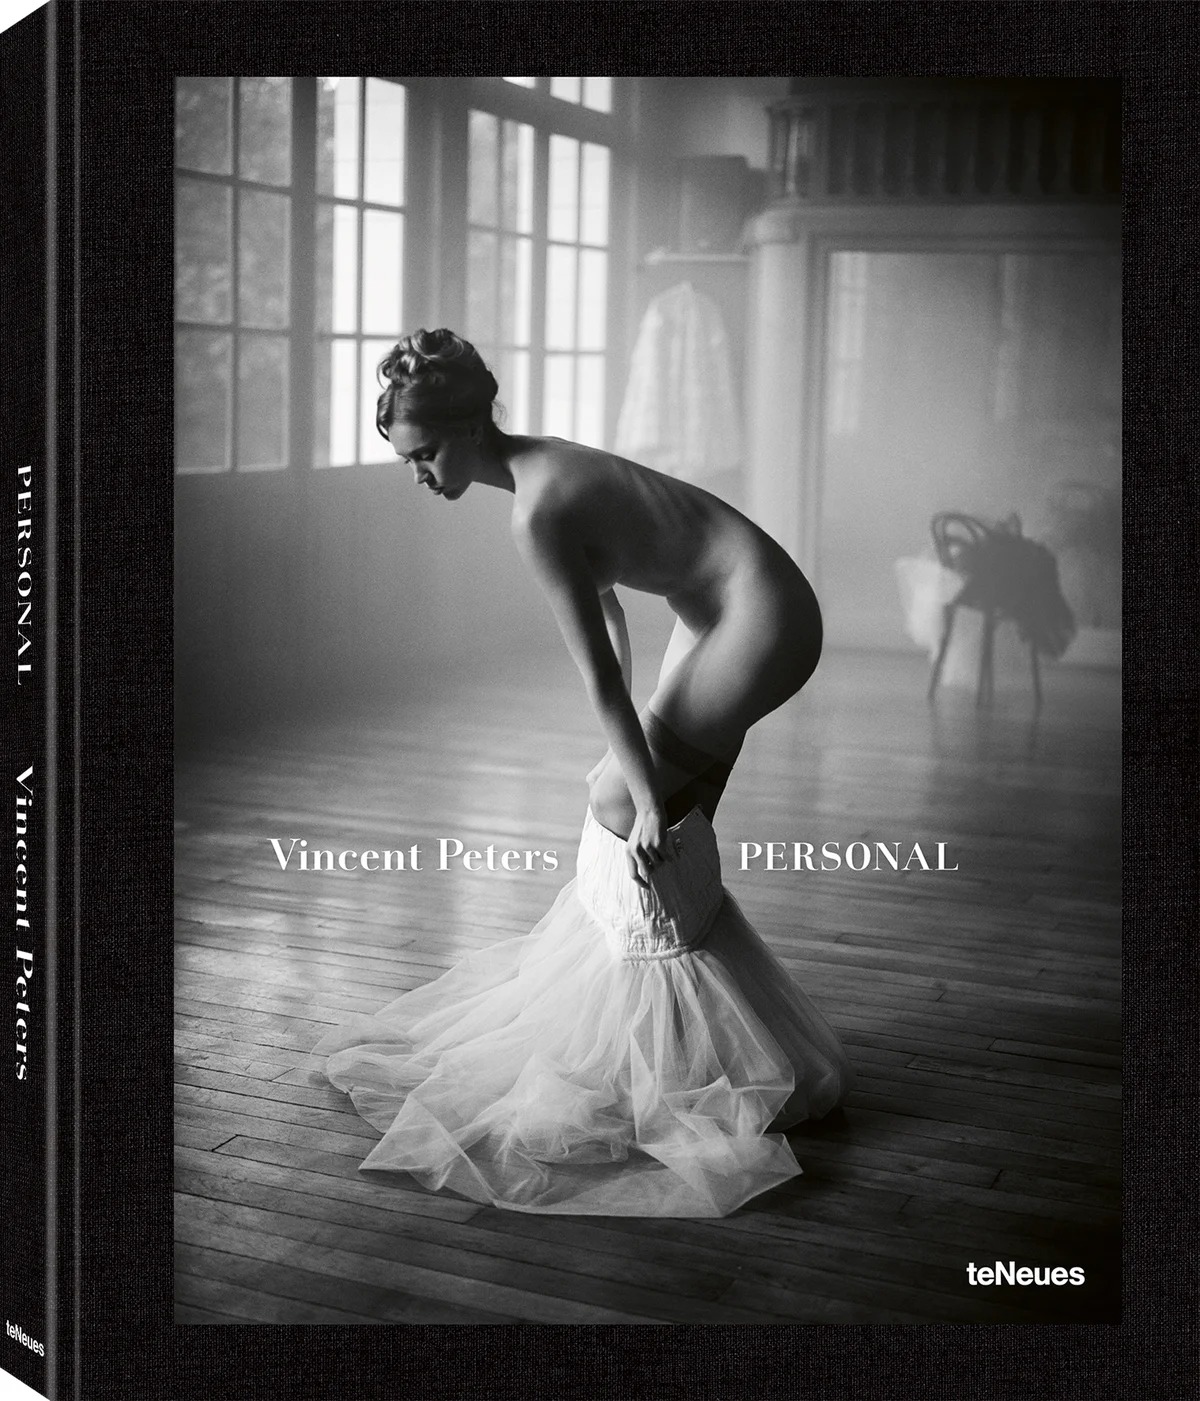 Vincent Peters: Personal